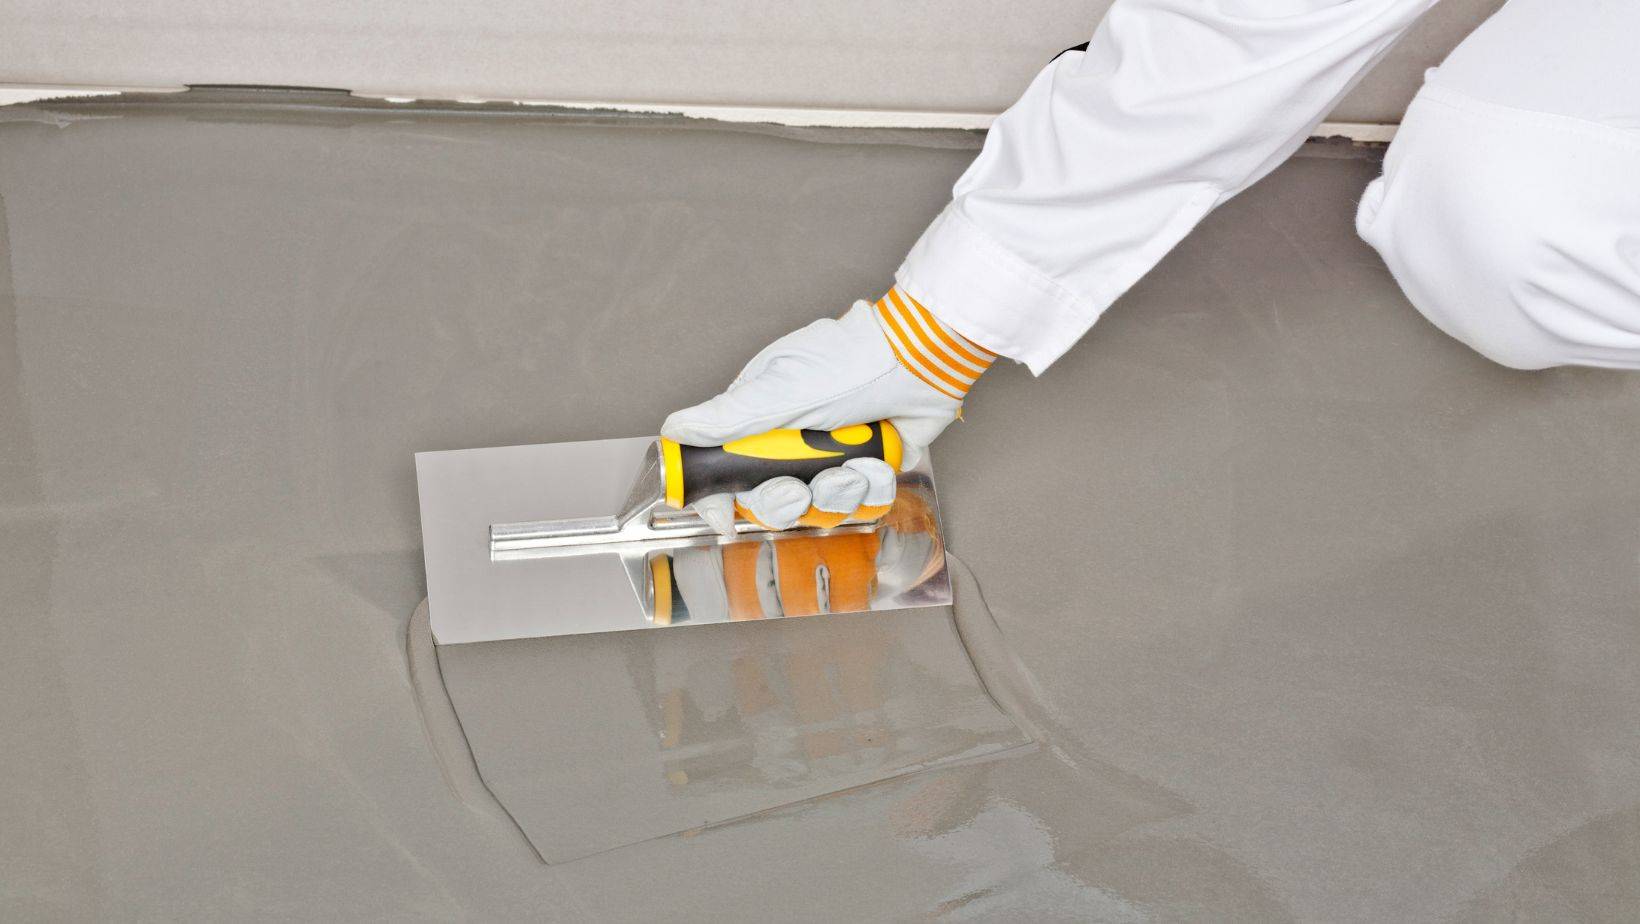 liquid self-leveling compound being applied on a floor surface